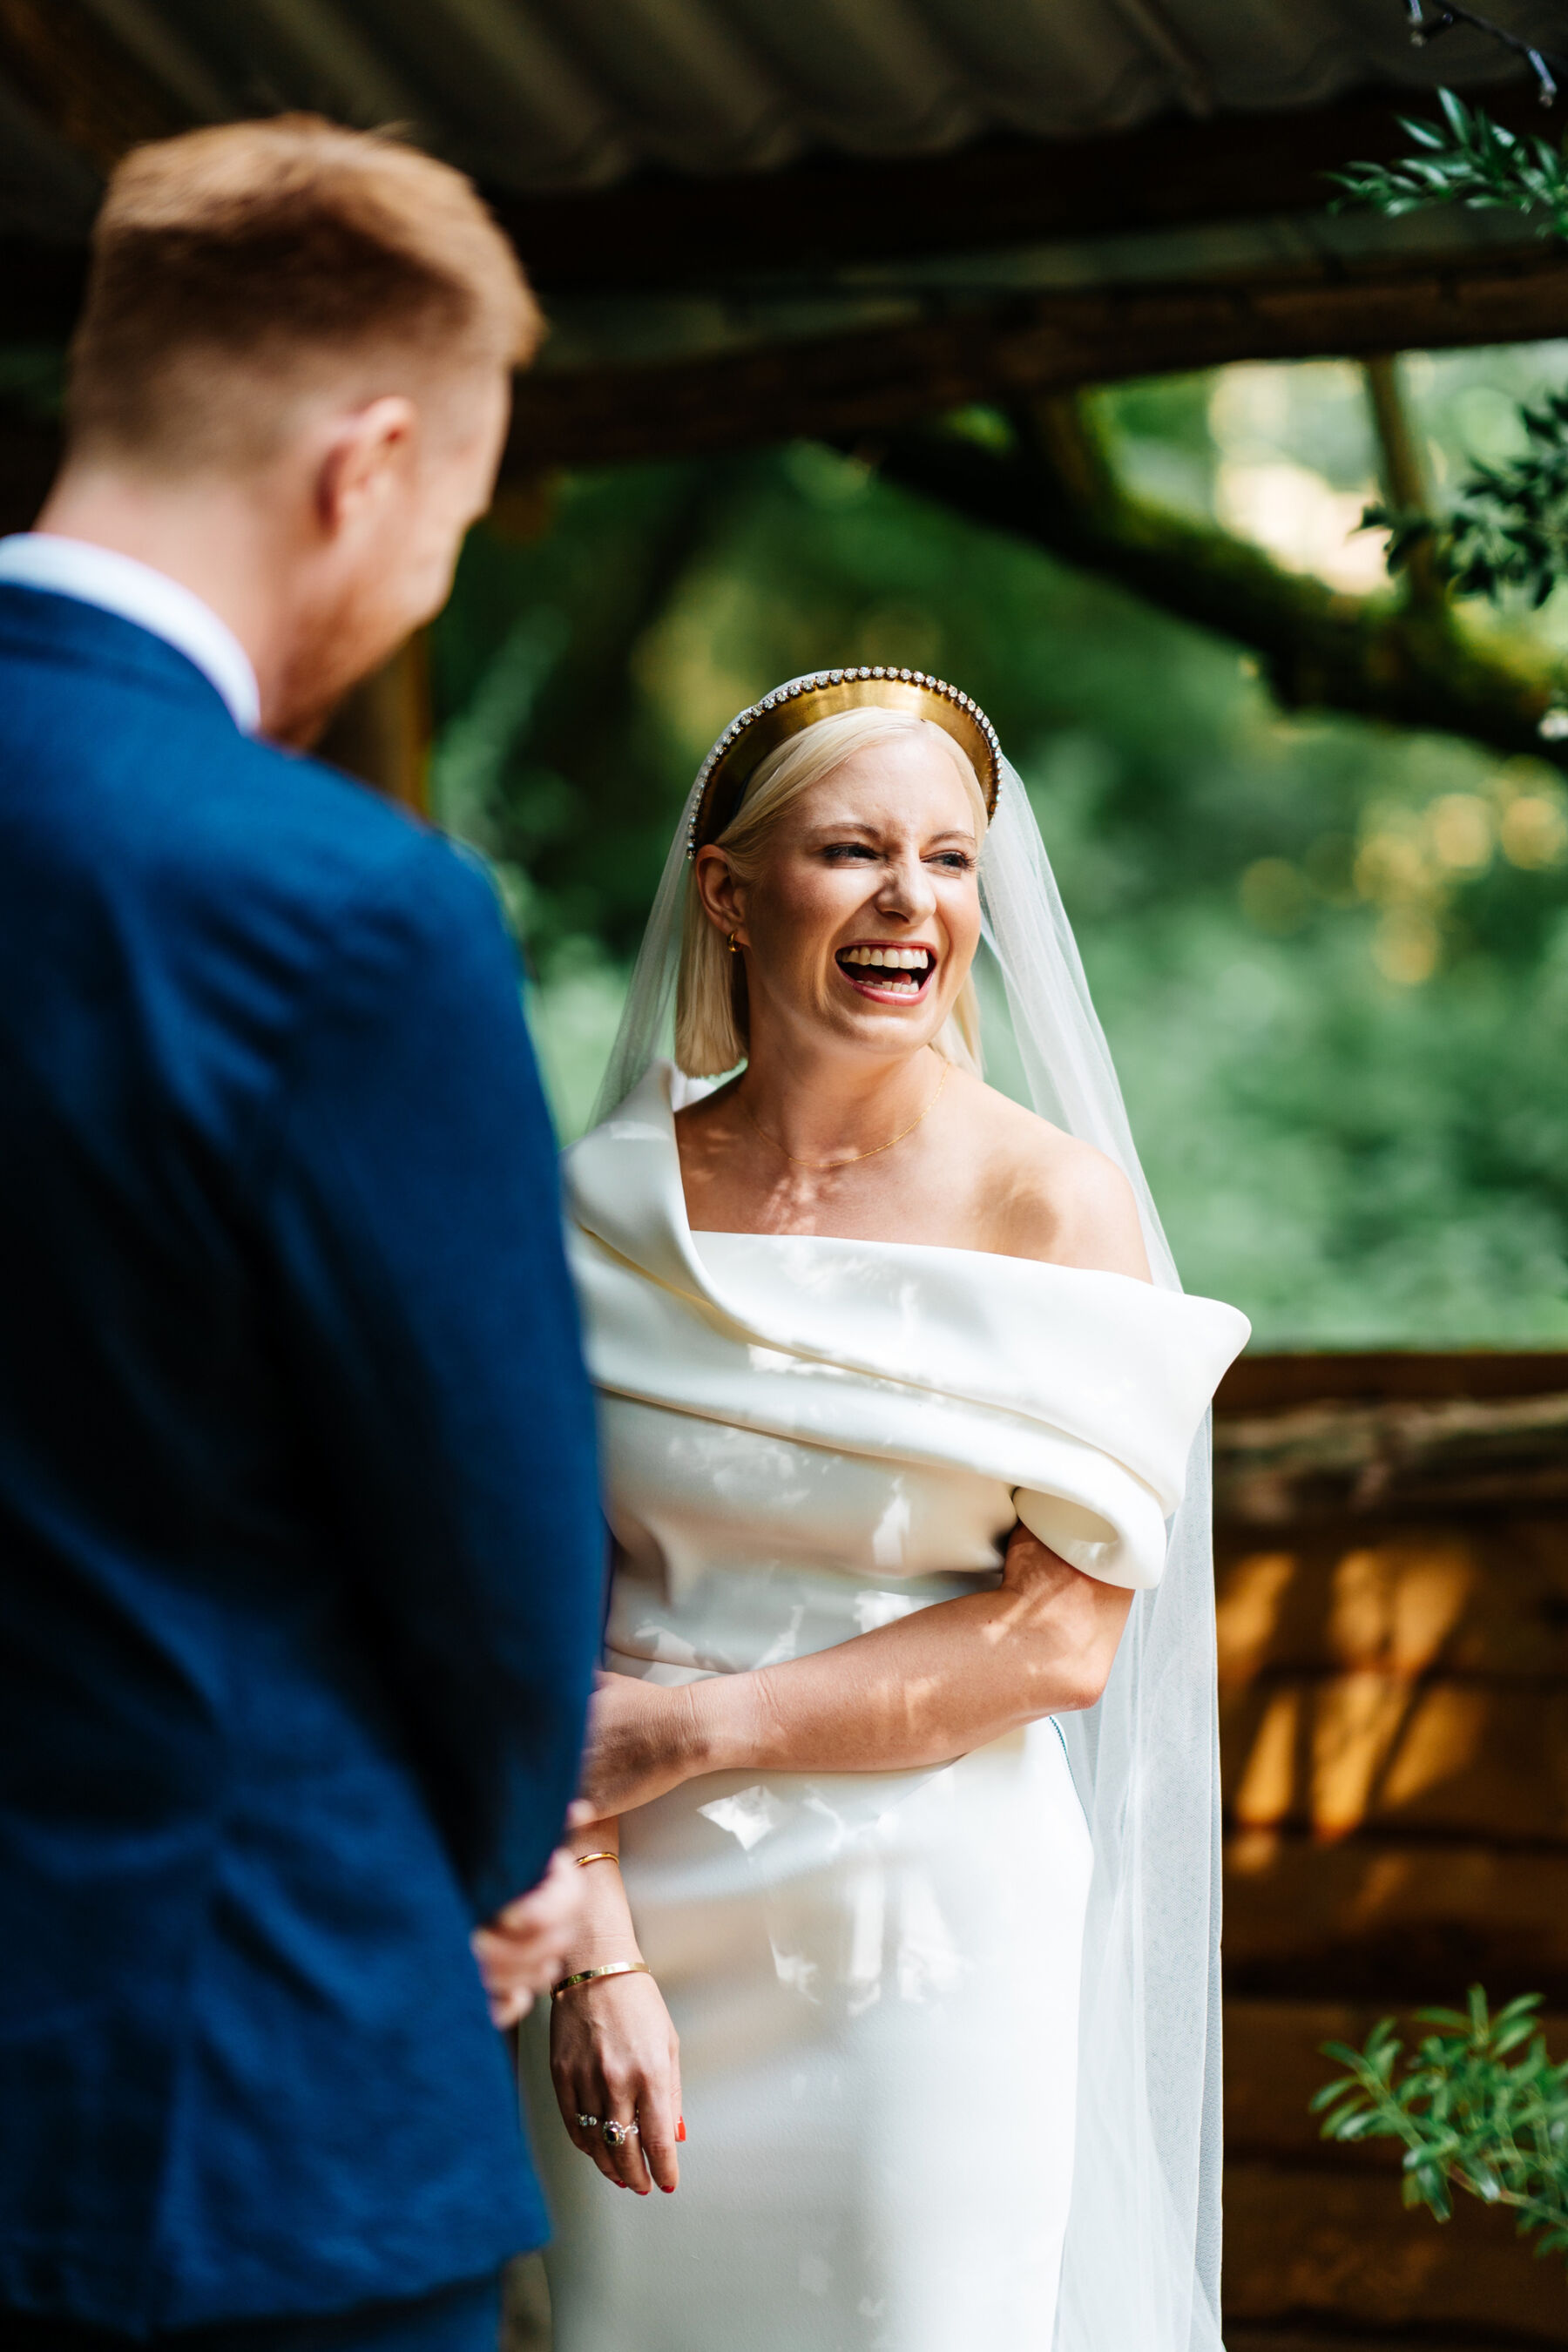 Laughing happy bride wearing Toni Maticevski contemporary wedding dress and gold headpiece.